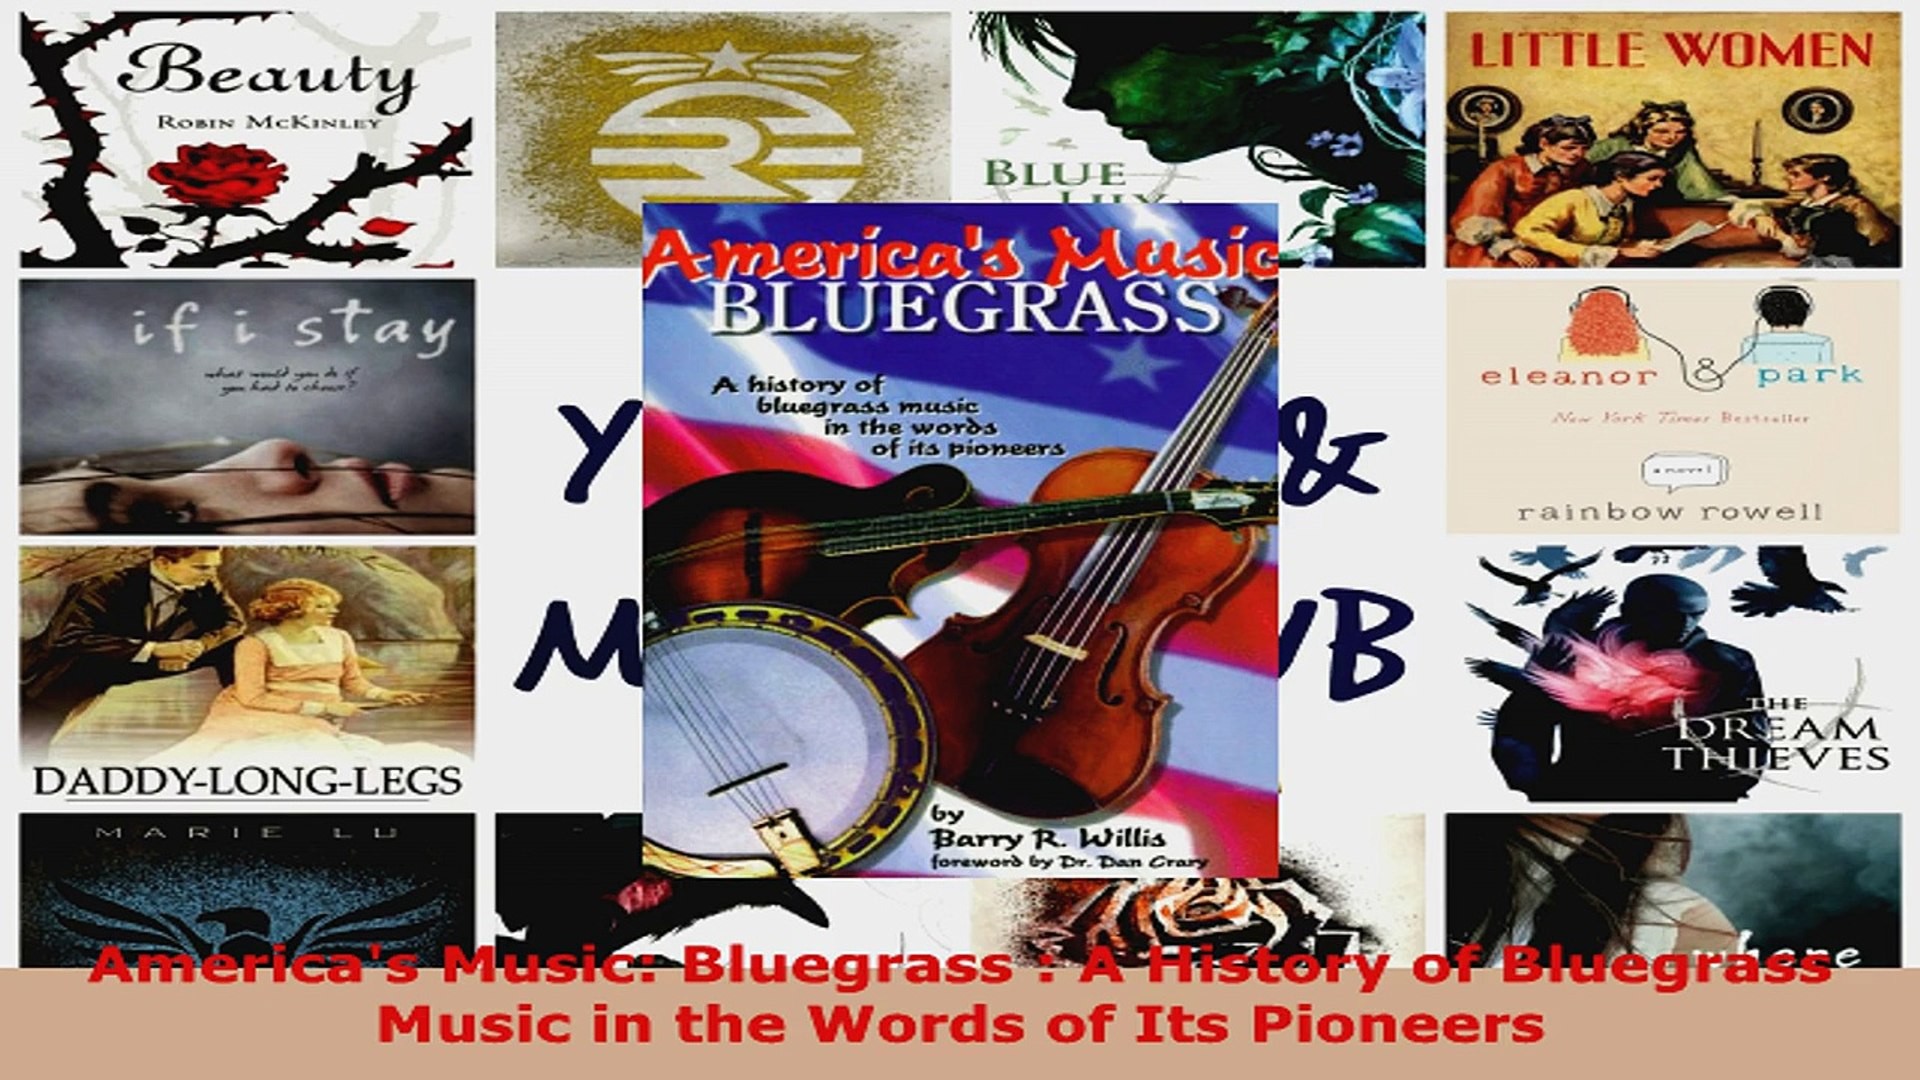 1920x1080 Download Americas Music Bluegrass A History of Bluegrass Music in the Words  of Its Pioneers PDF Online - video dailymotion